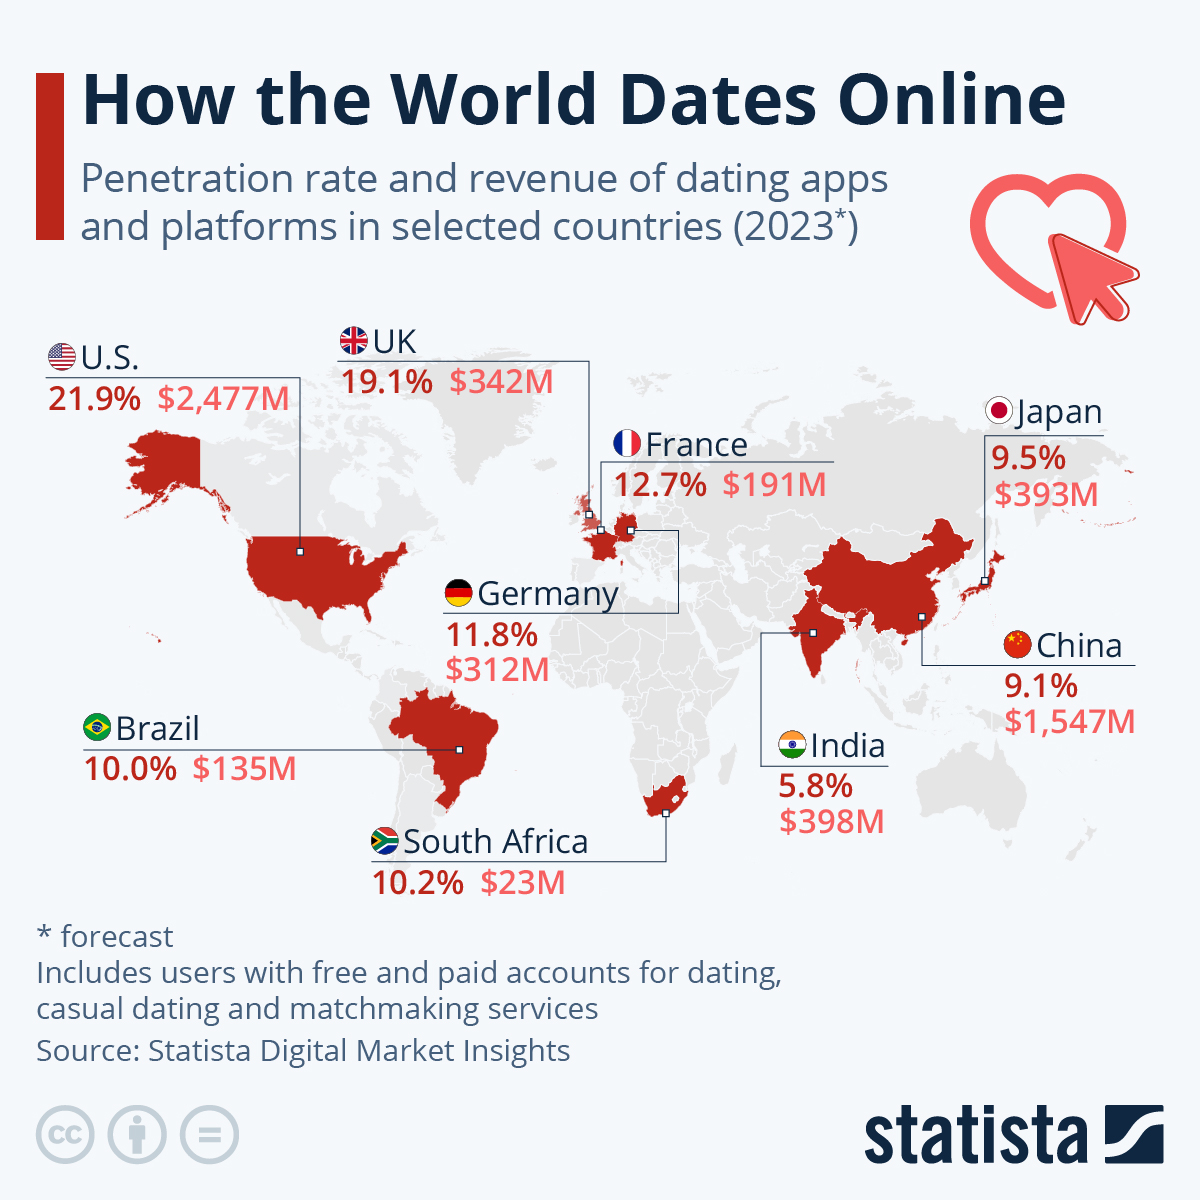 Chart with penetration rate and revenue of dating apps in US, UK, France, Germany, Brazil